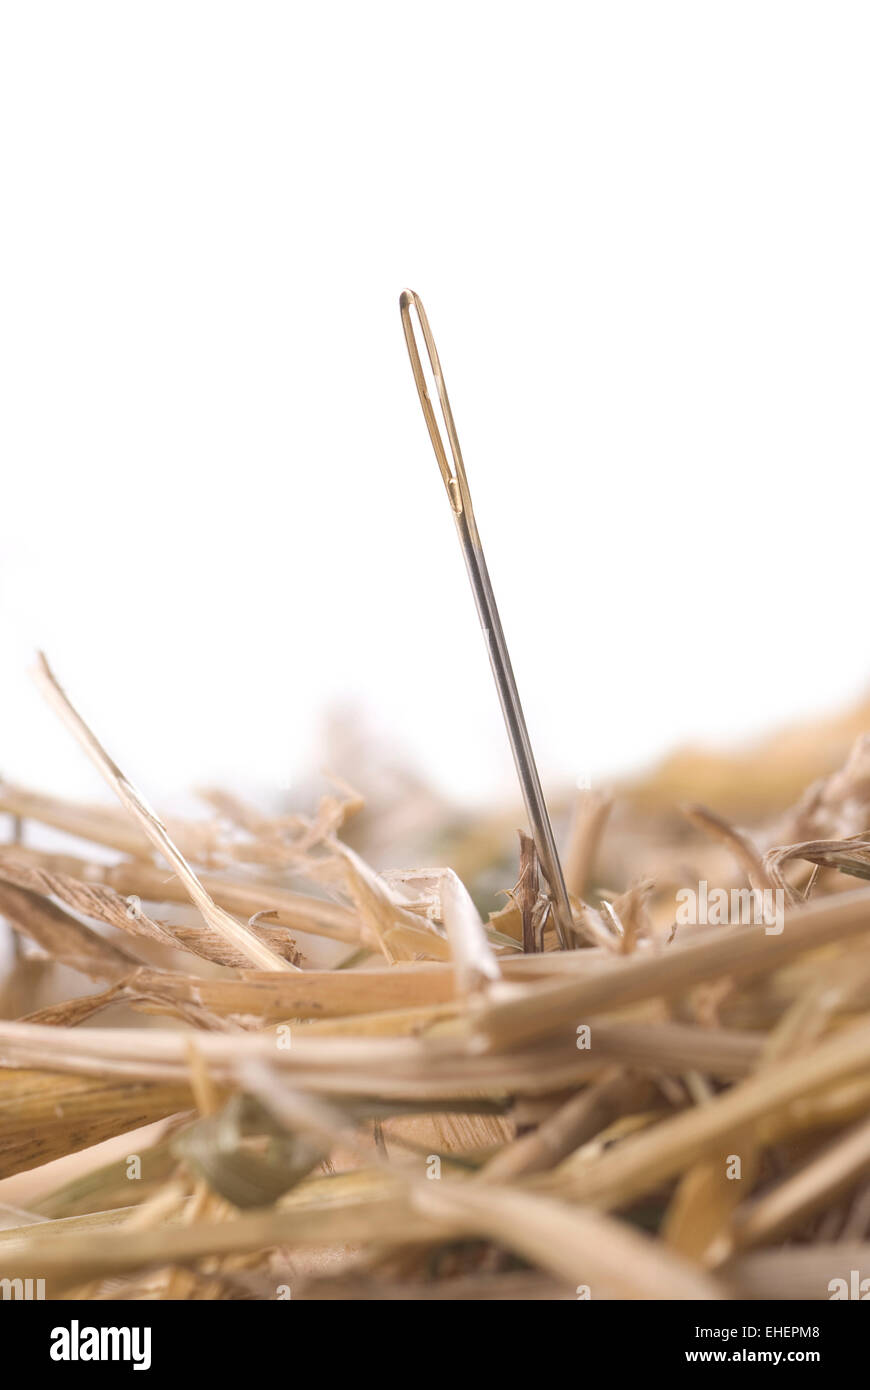 A needle in a haystack on white background. Stock Photo